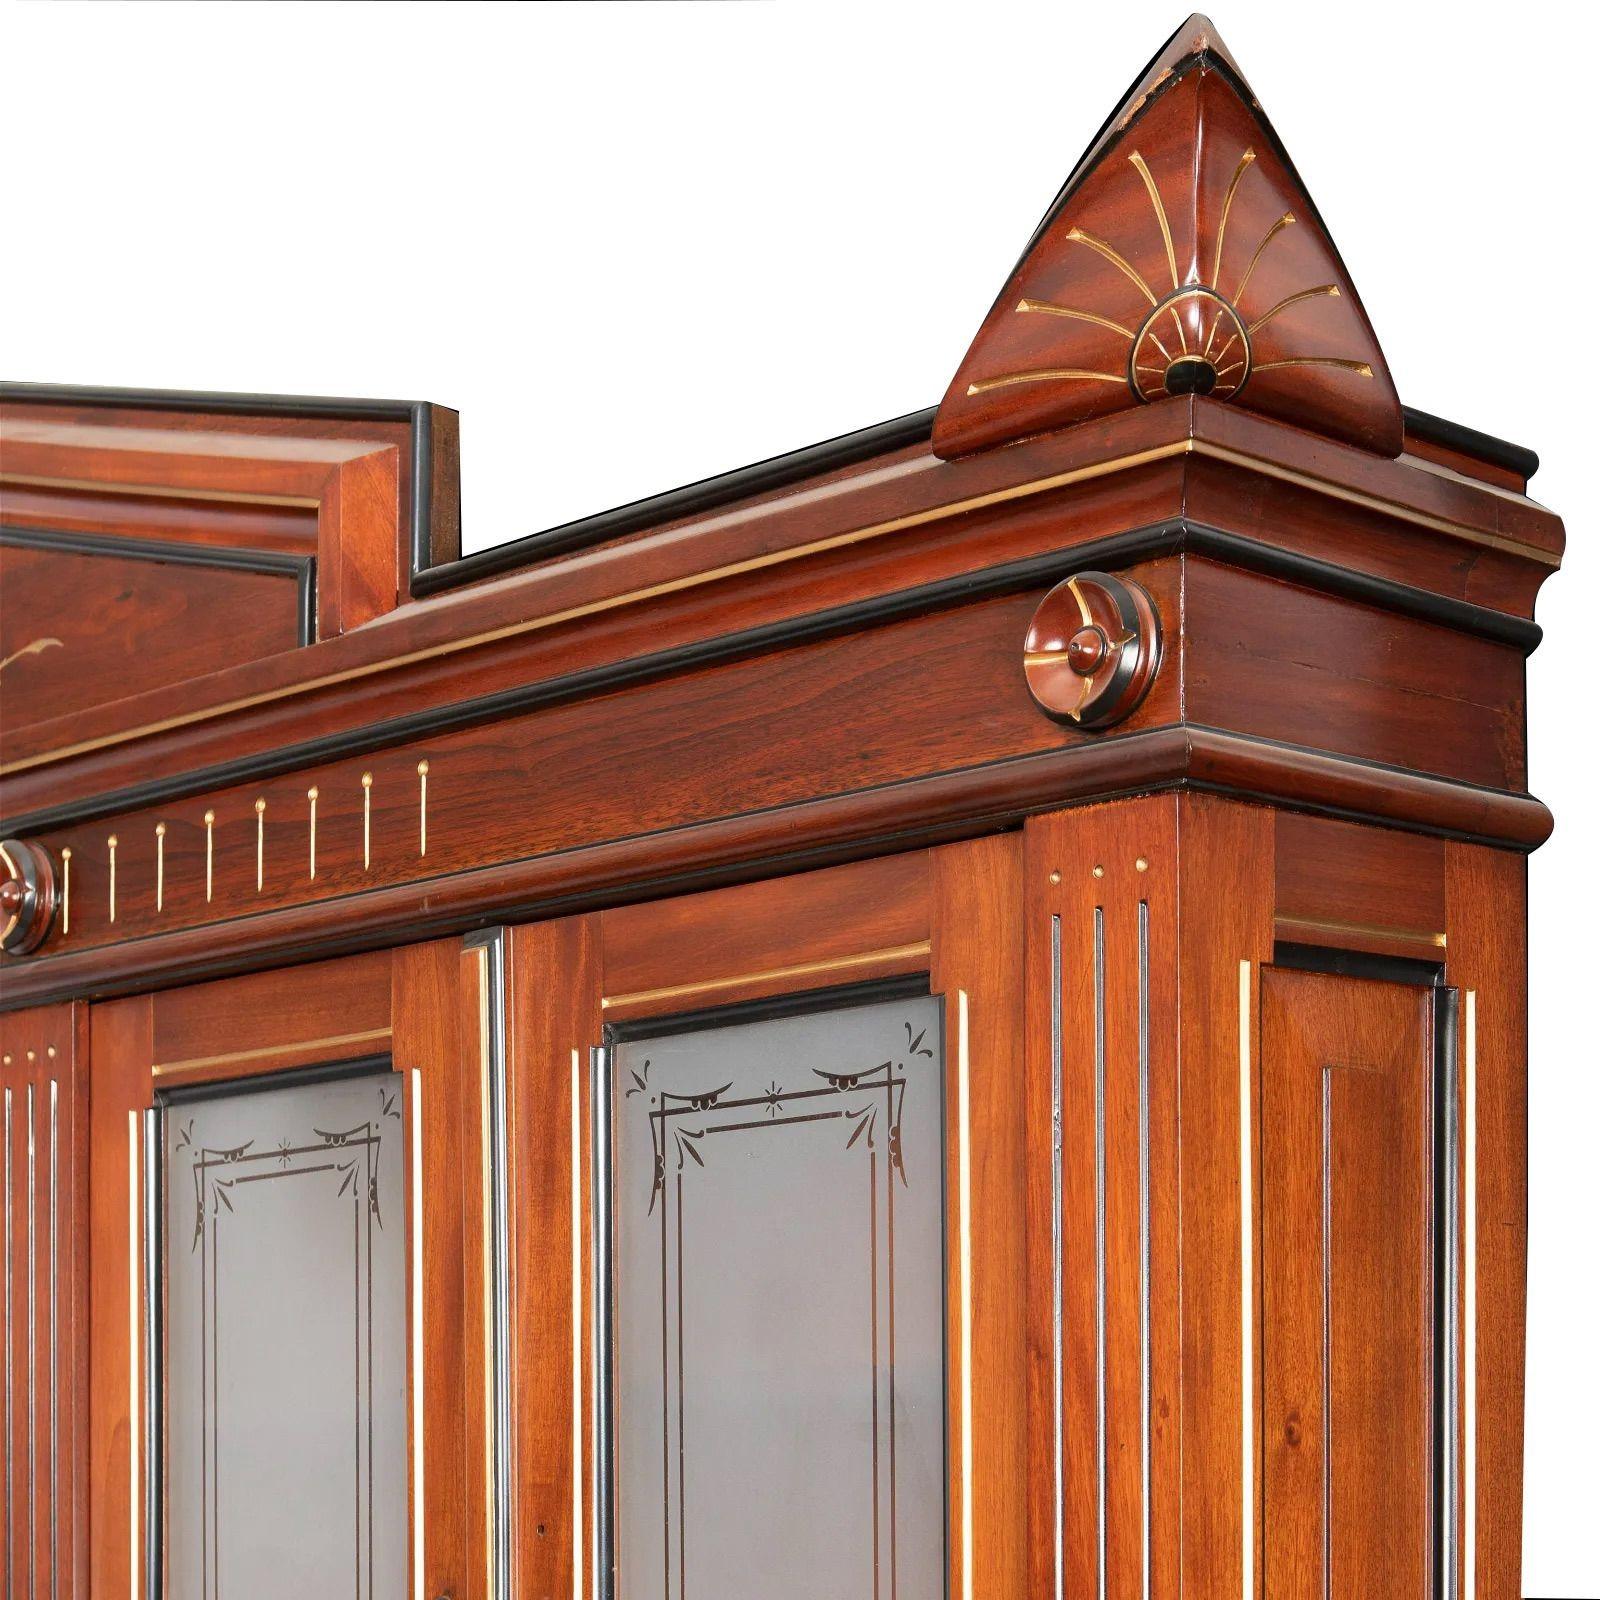 Victorian butler's cabinet, Late 19th century

Italian Renaissance-style, in carved walnut with gilt, ebonized, and glazed highlights with central sphere crest atop six opposing glazed cabinet doors over an open gallery with mirrored back splash